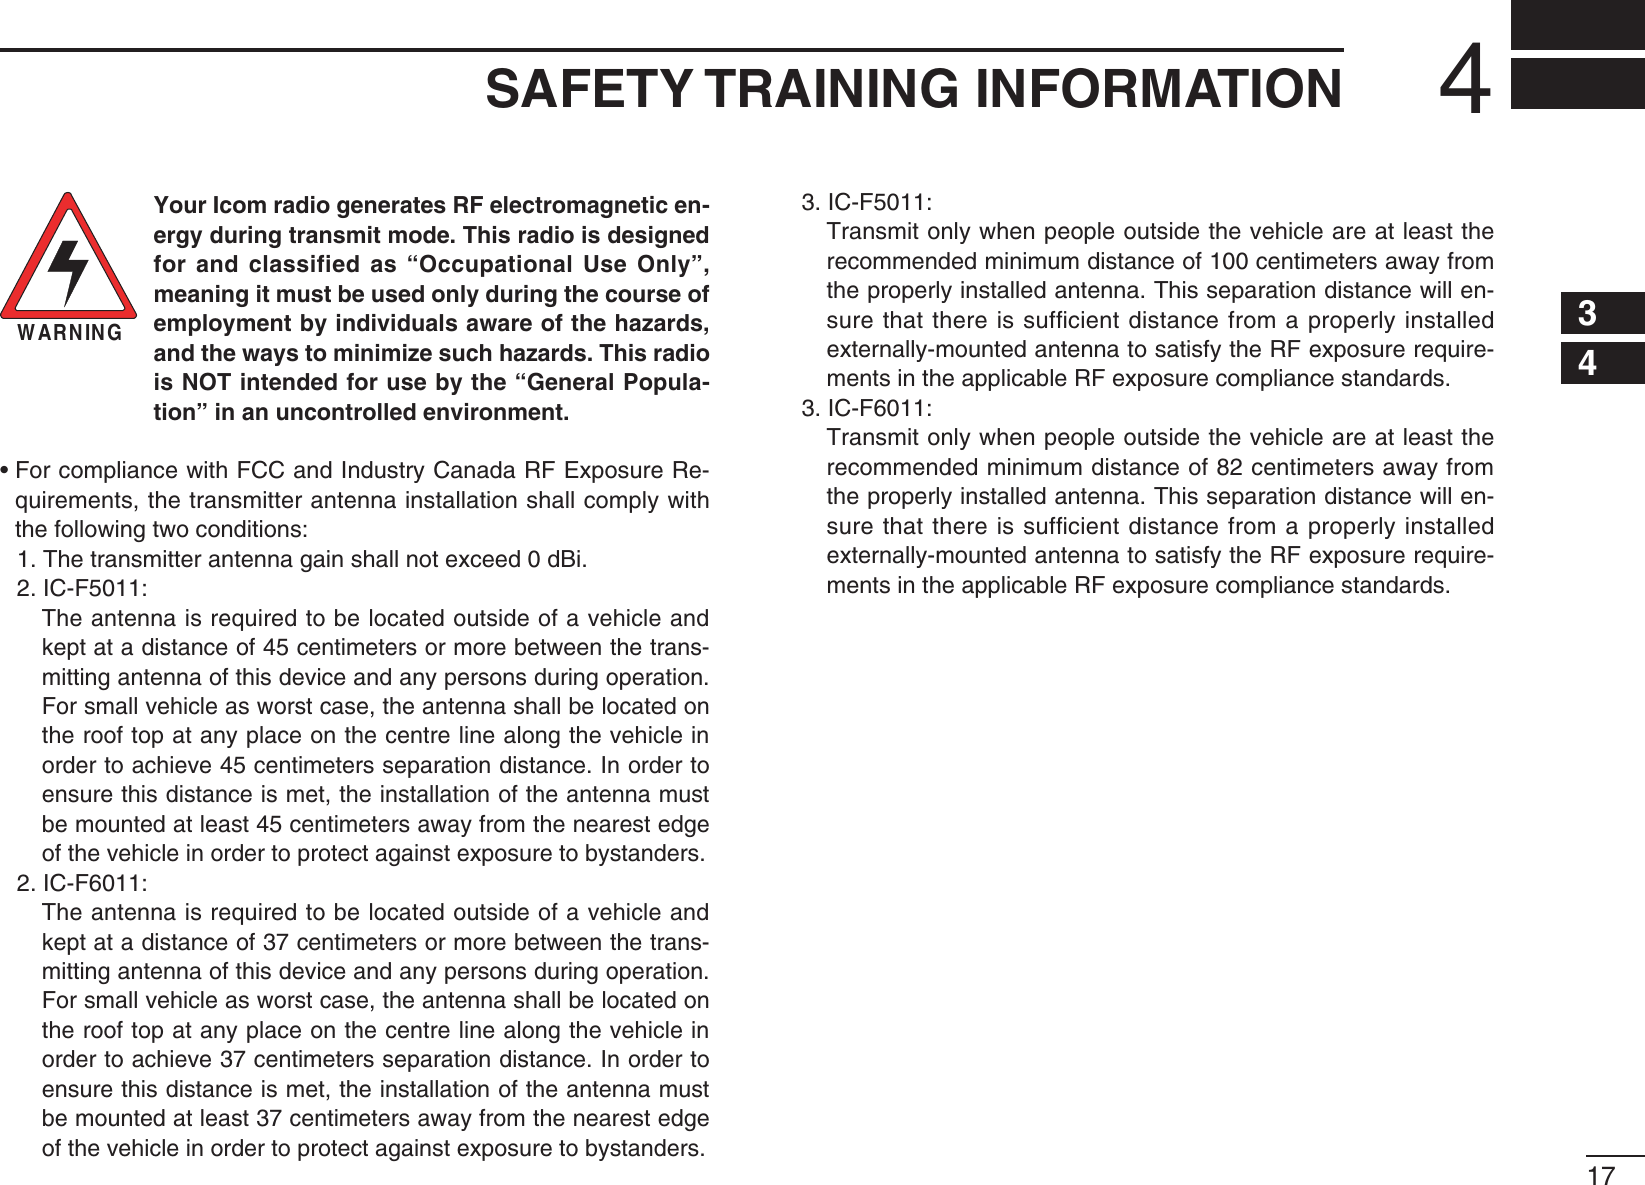 4SAFETY TRAINING INFORMATIONWARNINGYour Icom radio generates RF electromagnetic en-ergy during transmit mode. This radio is designed for and classified as “Occupational Use Only”, meaning it must be used only during the course of employment by individuals aware of the hazards, and the ways to minimize such hazards. This radio is NOT intended for use by the “General Popula-tion” in an uncontrolled environment.s&amp;ORCOMPLIANCEWITH&amp;##AND)NDUSTRY#ANADA2&amp;%XPOSURE2E-quirements, the transmitter antenna installation shall comply with the following two conditions: 4HETRANSMITTERANTENNAGAINSHALLNOTEXCEEDD&quot;I 2. IC-F5011:  The antenna is required to be located outside of a vehicle and kept at a distance of 45 centimeters or more between the trans-mitting antenna of this device and any persons during operation. For small vehicle as worst case, the antenna shall be located on the roof top at any place on the centre line along the vehicle in order to achieve 45 centimeters separation distance. In order to ensure this distance is met, the installation of the antenna must be mounted at least 45 centimeters away from the nearest edge OFTHEVEHICLEINORDERTOPROTECTAGAINSTEXPOSURETOBYSTANDERS 2. IC-F6011:  The antenna is required to be located outside of a vehicle and kept at a distance of 37 centimeters or more between the trans-mitting antenna of this device and any persons during operation. For small vehicle as worst case, the antenna shall be located on the roof top at any place on the centre line along the vehicle in order to achieve 37 centimeters separation distance. In order to ensure this distance is met, the installation of the antenna must be mounted at least 37 centimeters away from the nearest edge OFTHEVEHICLEINORDERTOPROTECTAGAINSTEXPOSURETOBYSTANDERS 3. IC-F5011:  Transmit only when people outside the vehicle are at least the recommended minimum distance of 100 centimeters away from the properly installed antenna. This separation distance will en-sure that there is sufﬁcient distance from a properly installed EXTERNALLYMOUNTEDANTENNATOSATISFYTHE2&amp;EXPOSUREREQUIRE-MENTSINTHEAPPLICABLE2&amp;EXPOSURECOMPLIANCESTANDARDS 3. IC-F6011:  Transmit only when people outside the vehicle are at least the recommended minimum distance of 82 centimeters away from the properly installed antenna. This separation distance will en-sure that there is sufﬁcient distance from a properly installed EXTERNALLYMOUNTEDANTENNATOSATISFYTHE2&amp;EXPOSUREREQUIRE-MENTSINTHEAPPLICABLE2&amp;EXPOSURECOMPLIANCESTANDARDS1256789101112131415161734